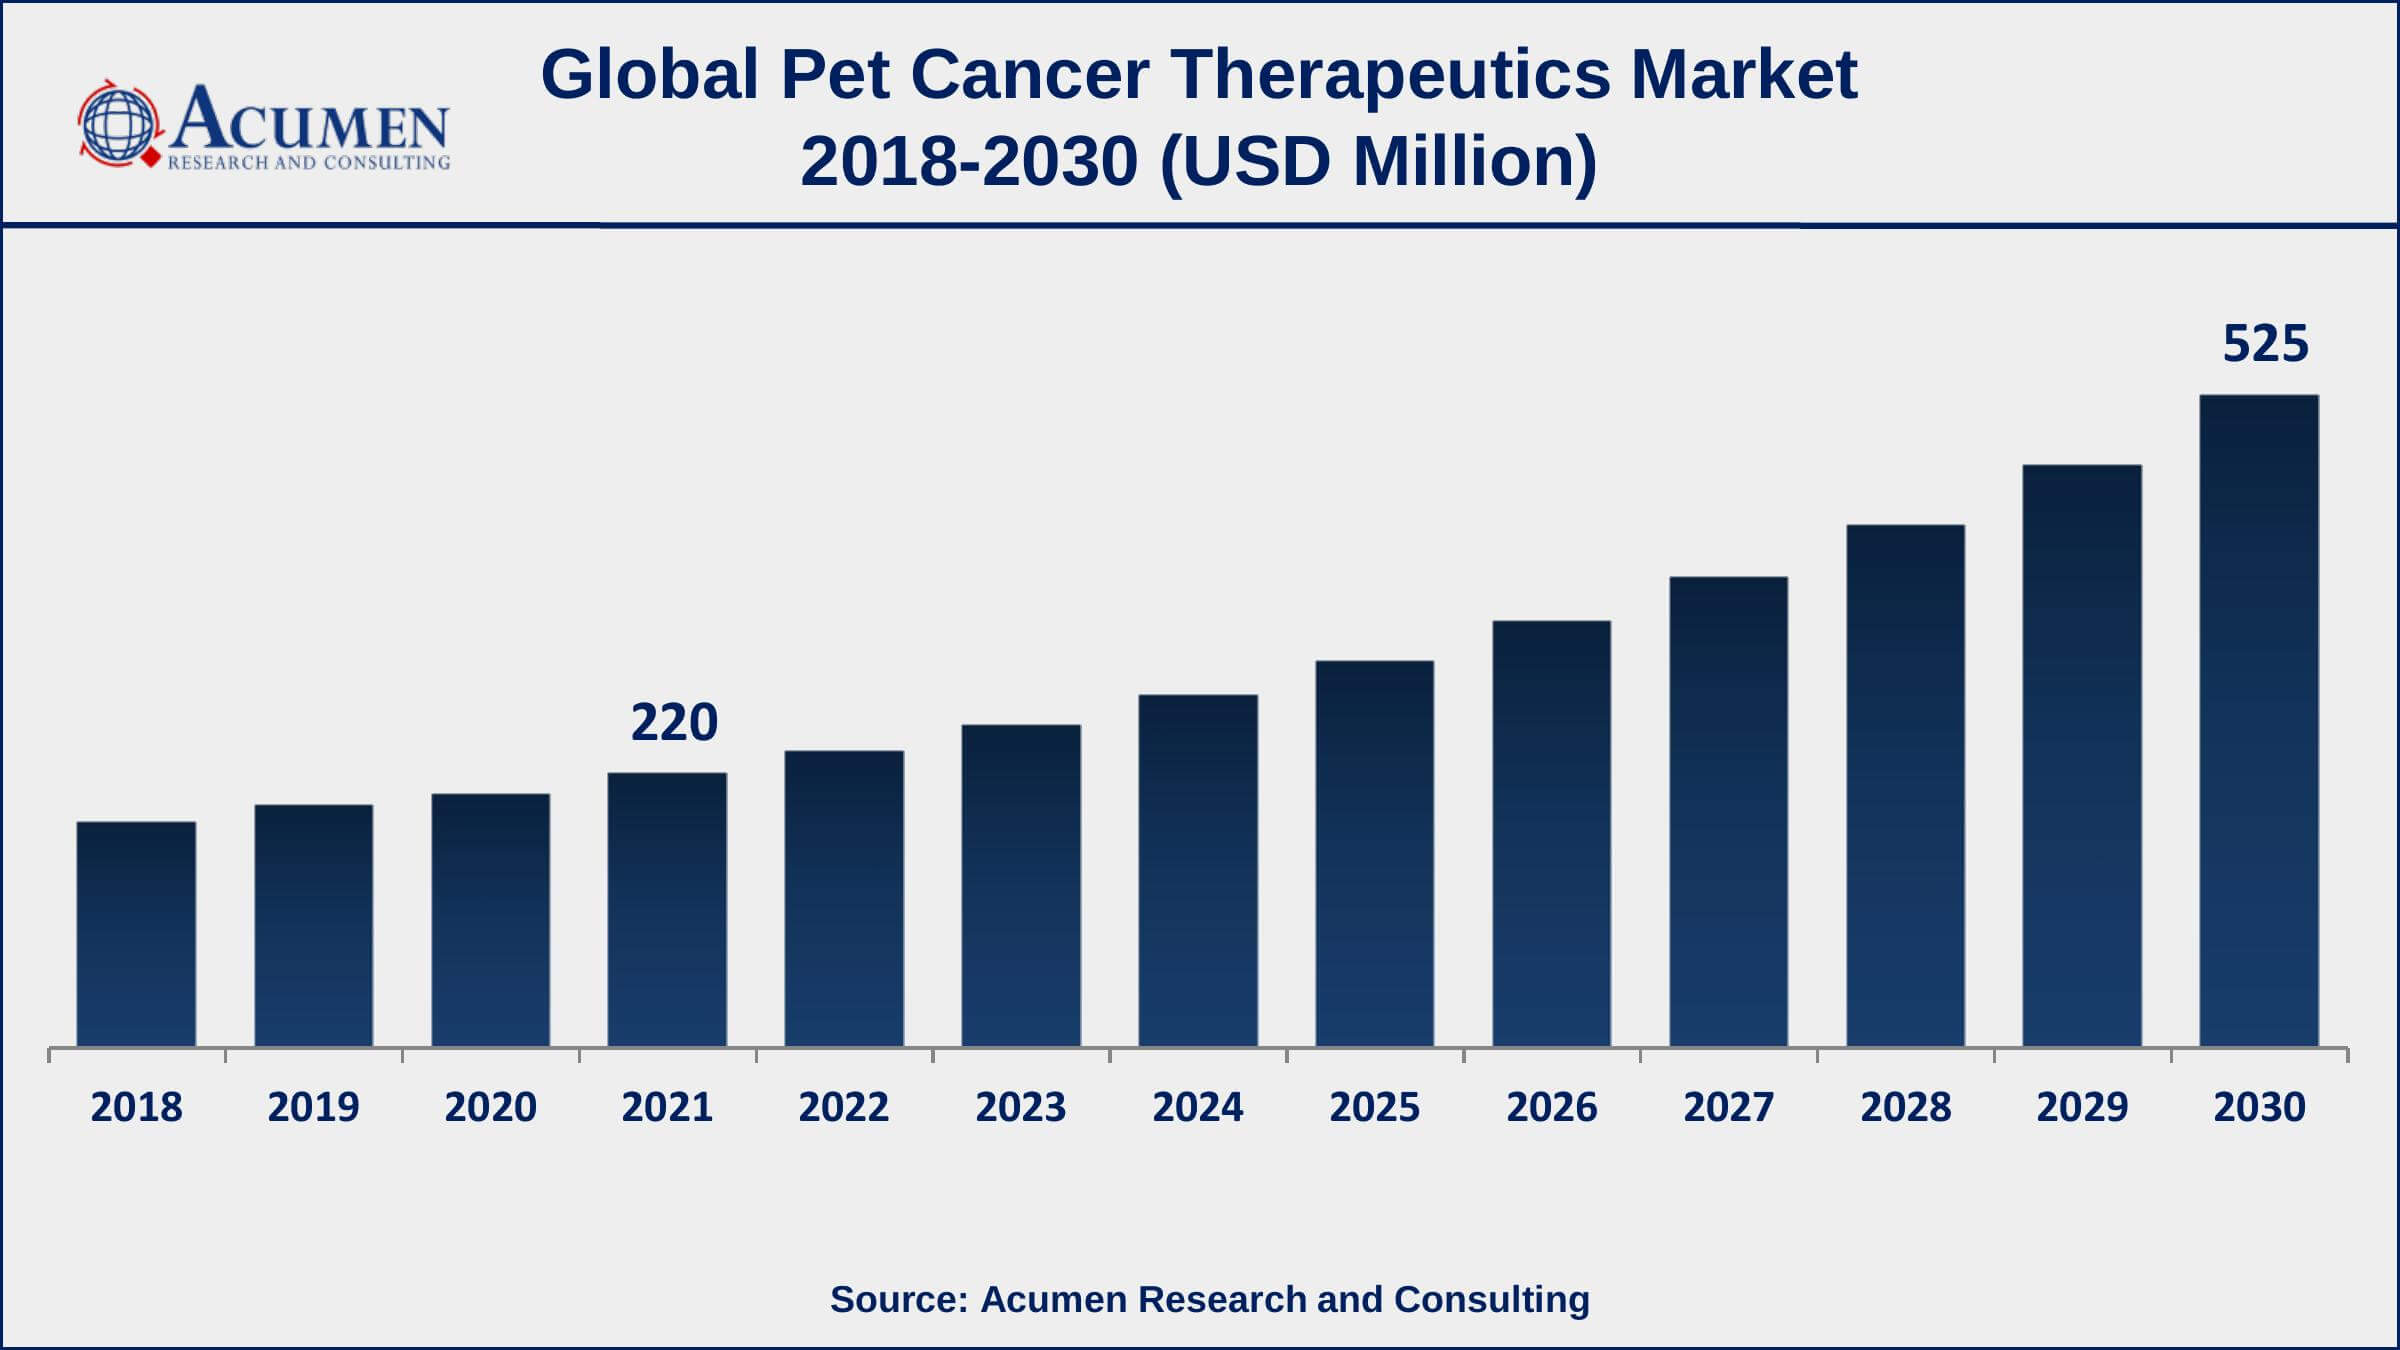 Asia-Pacific pet cancer therapeutics market growth will observe strongest CAGR from 2022 to 2030